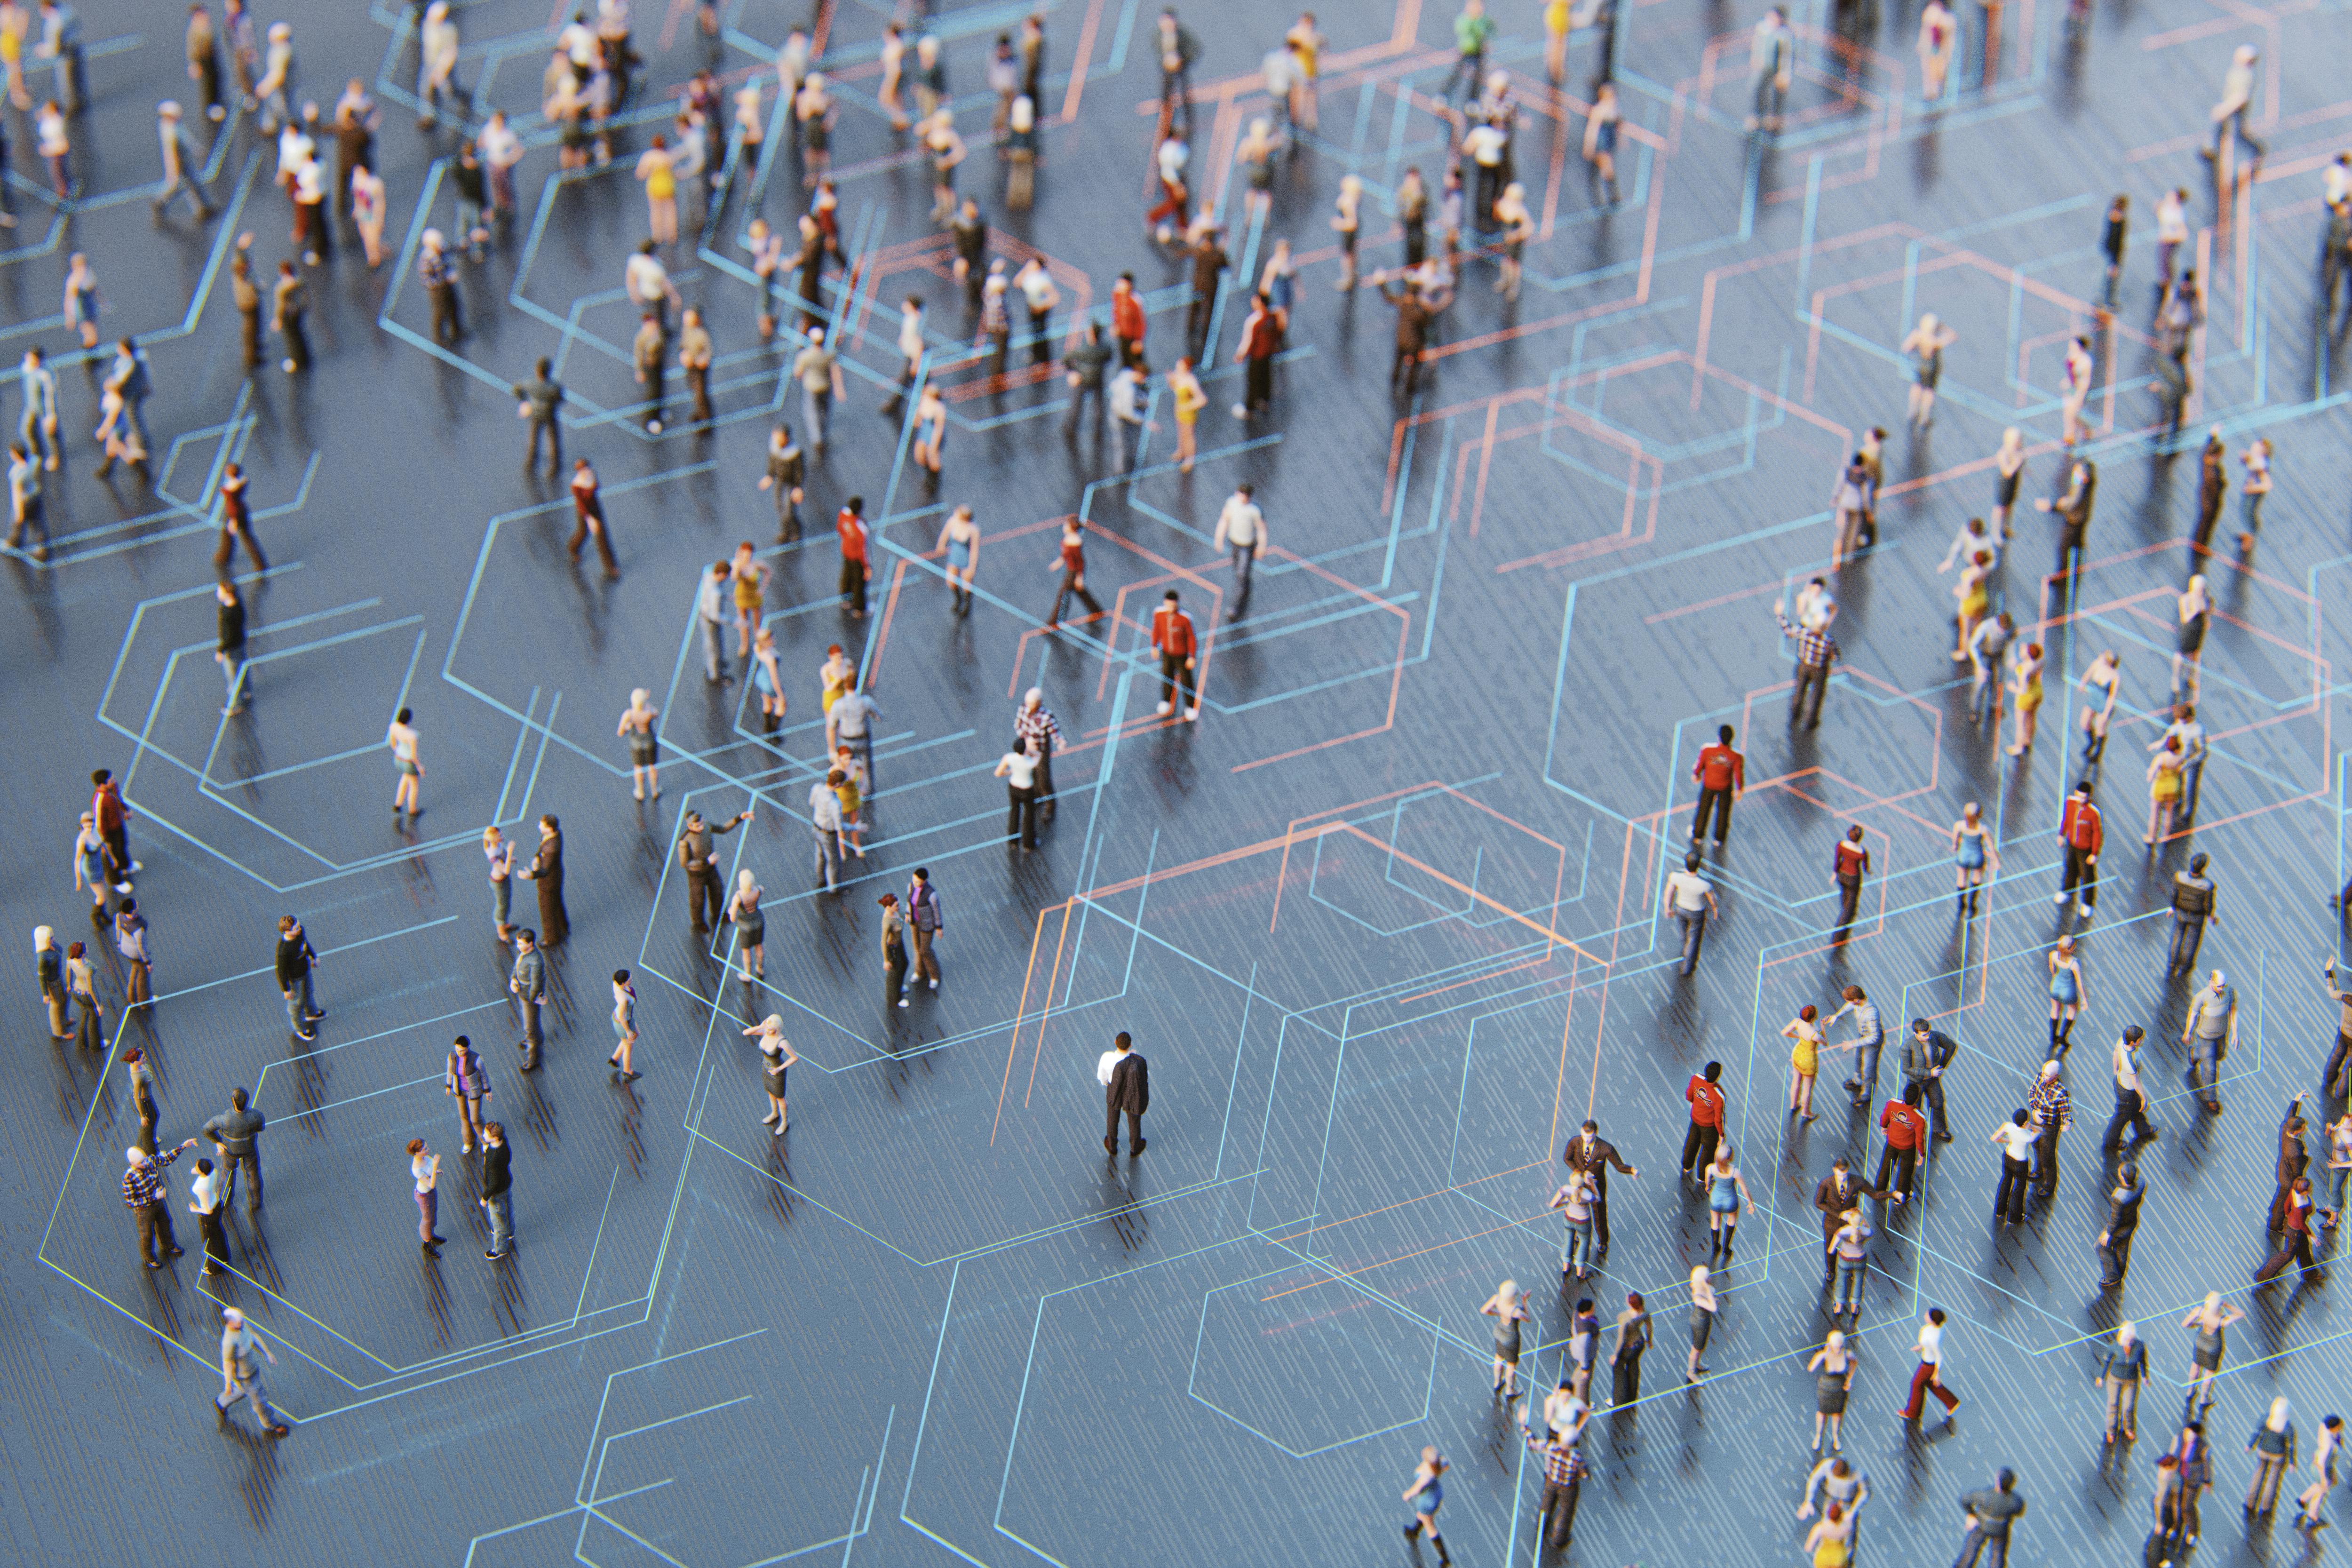 Overhead shot of many people walking on a motherboard grid